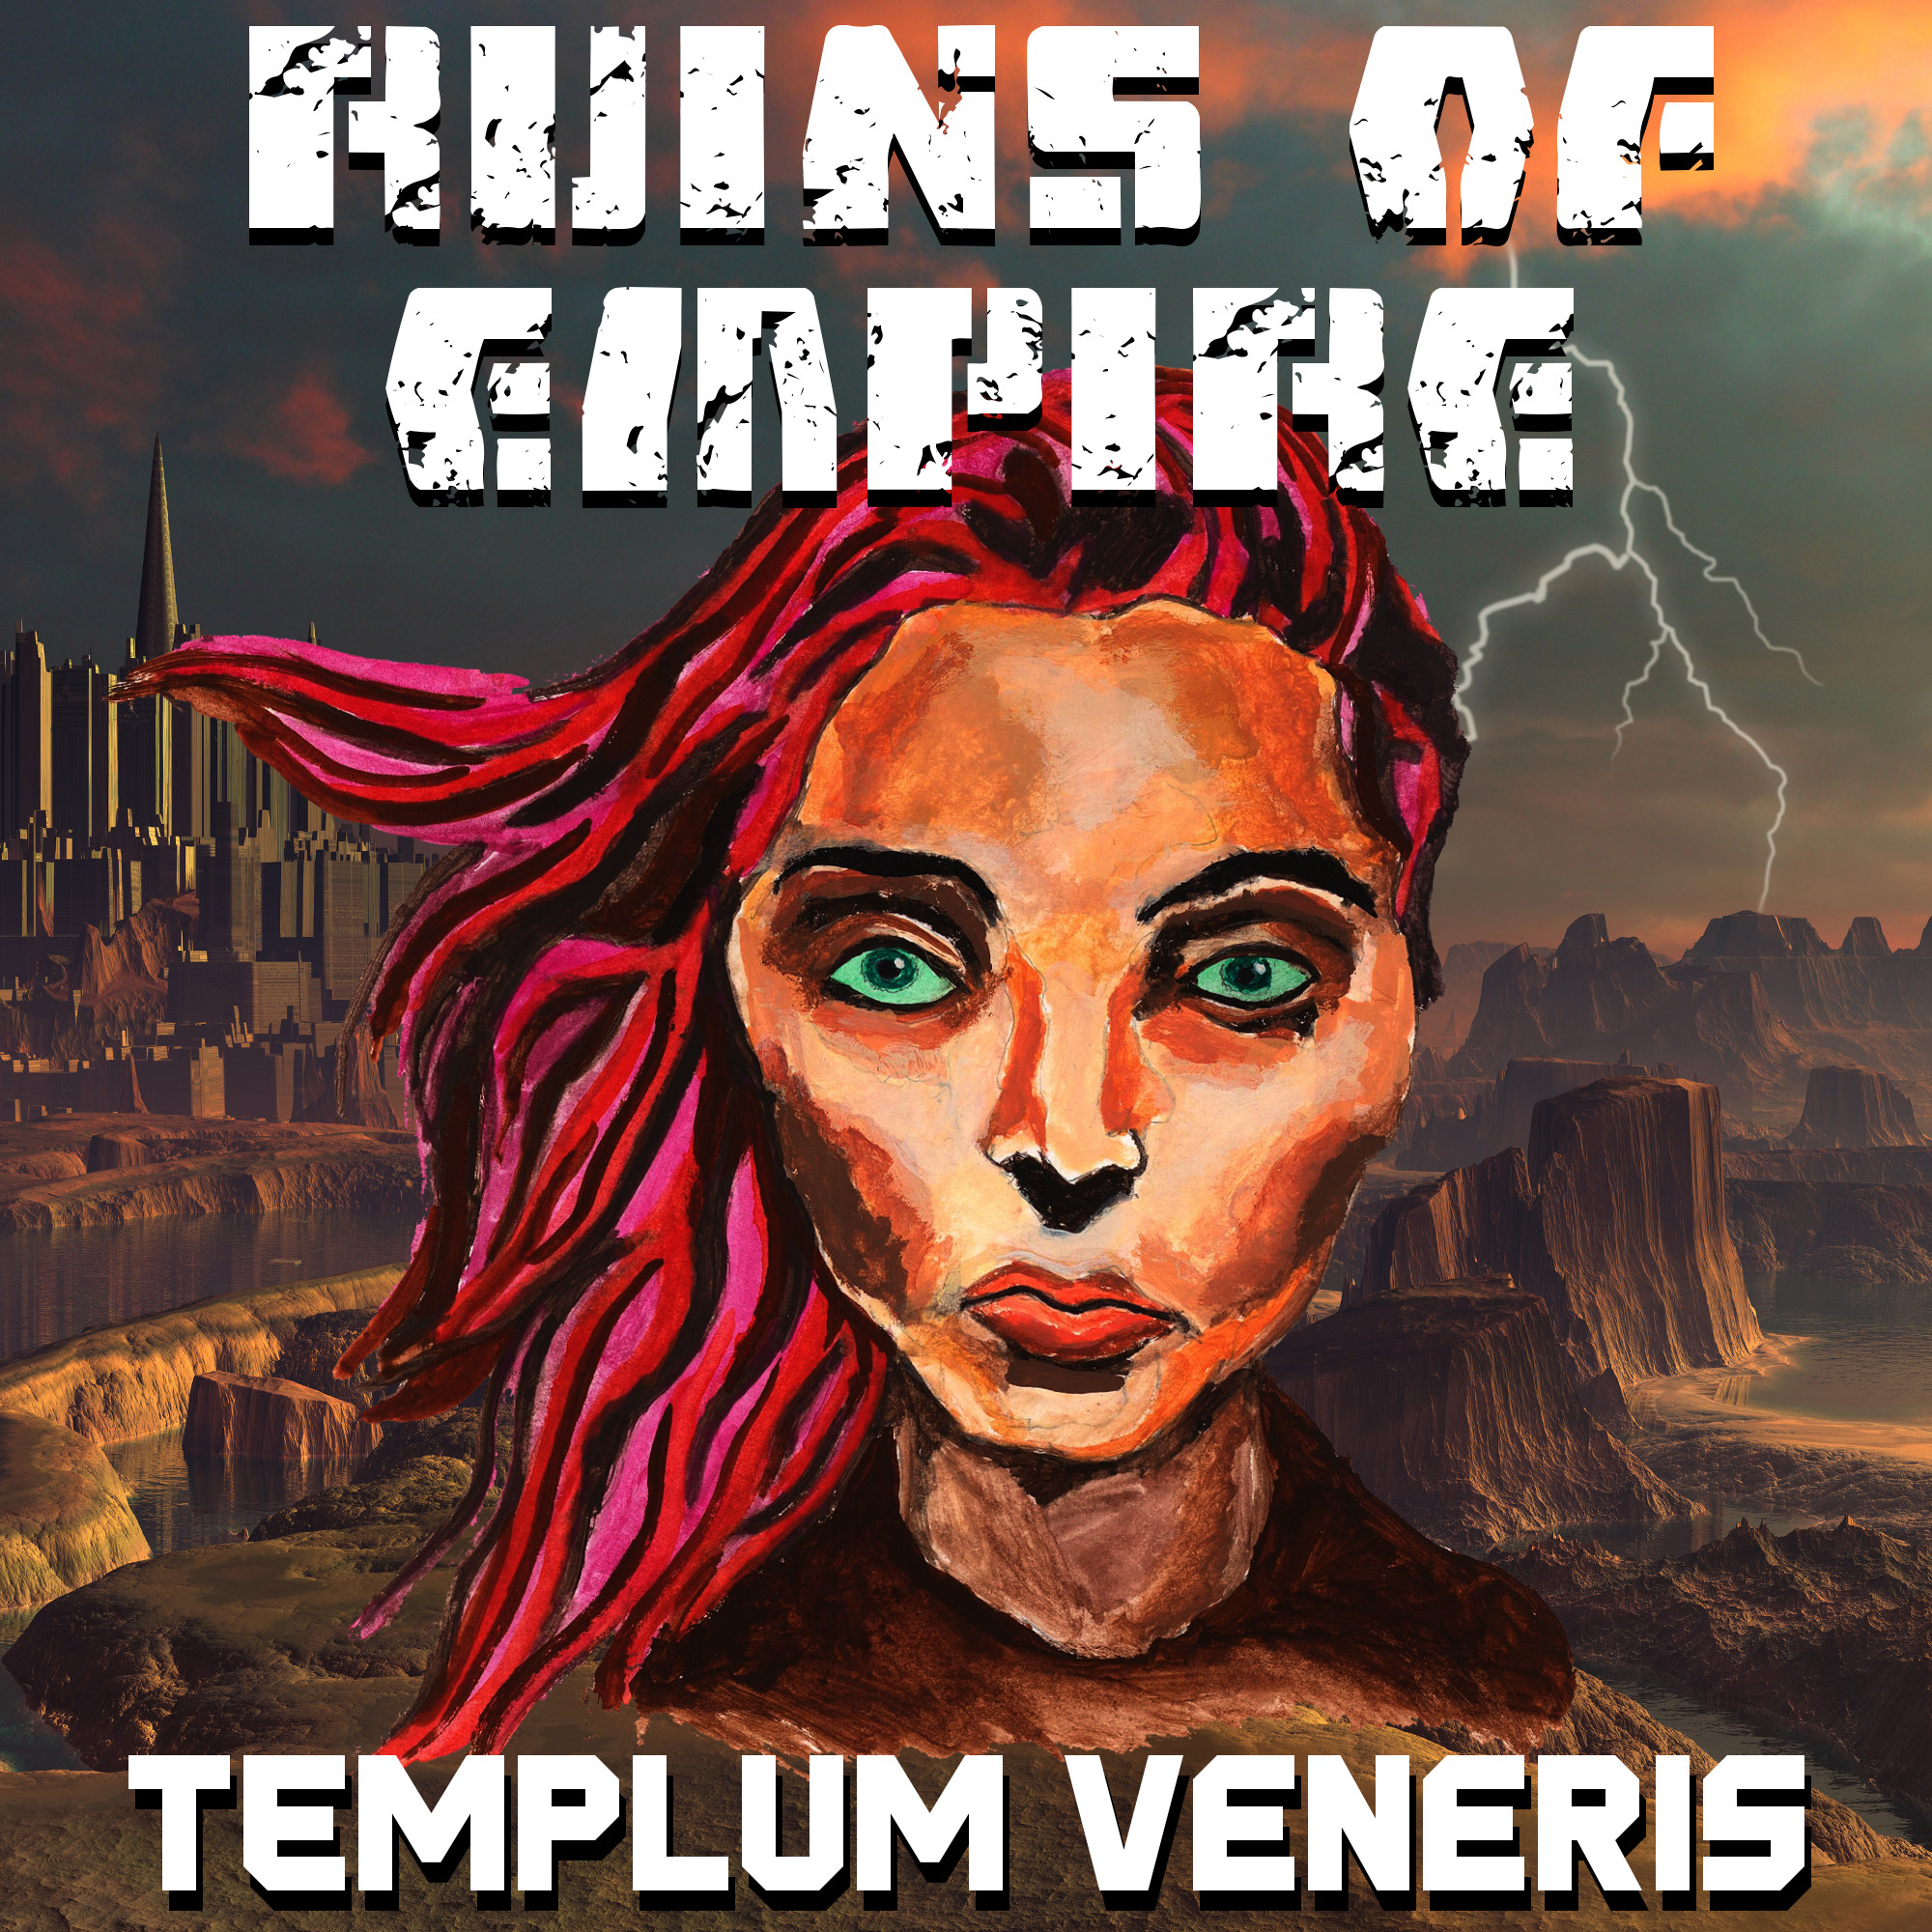 Coming Up Next On Ruins of Empire...